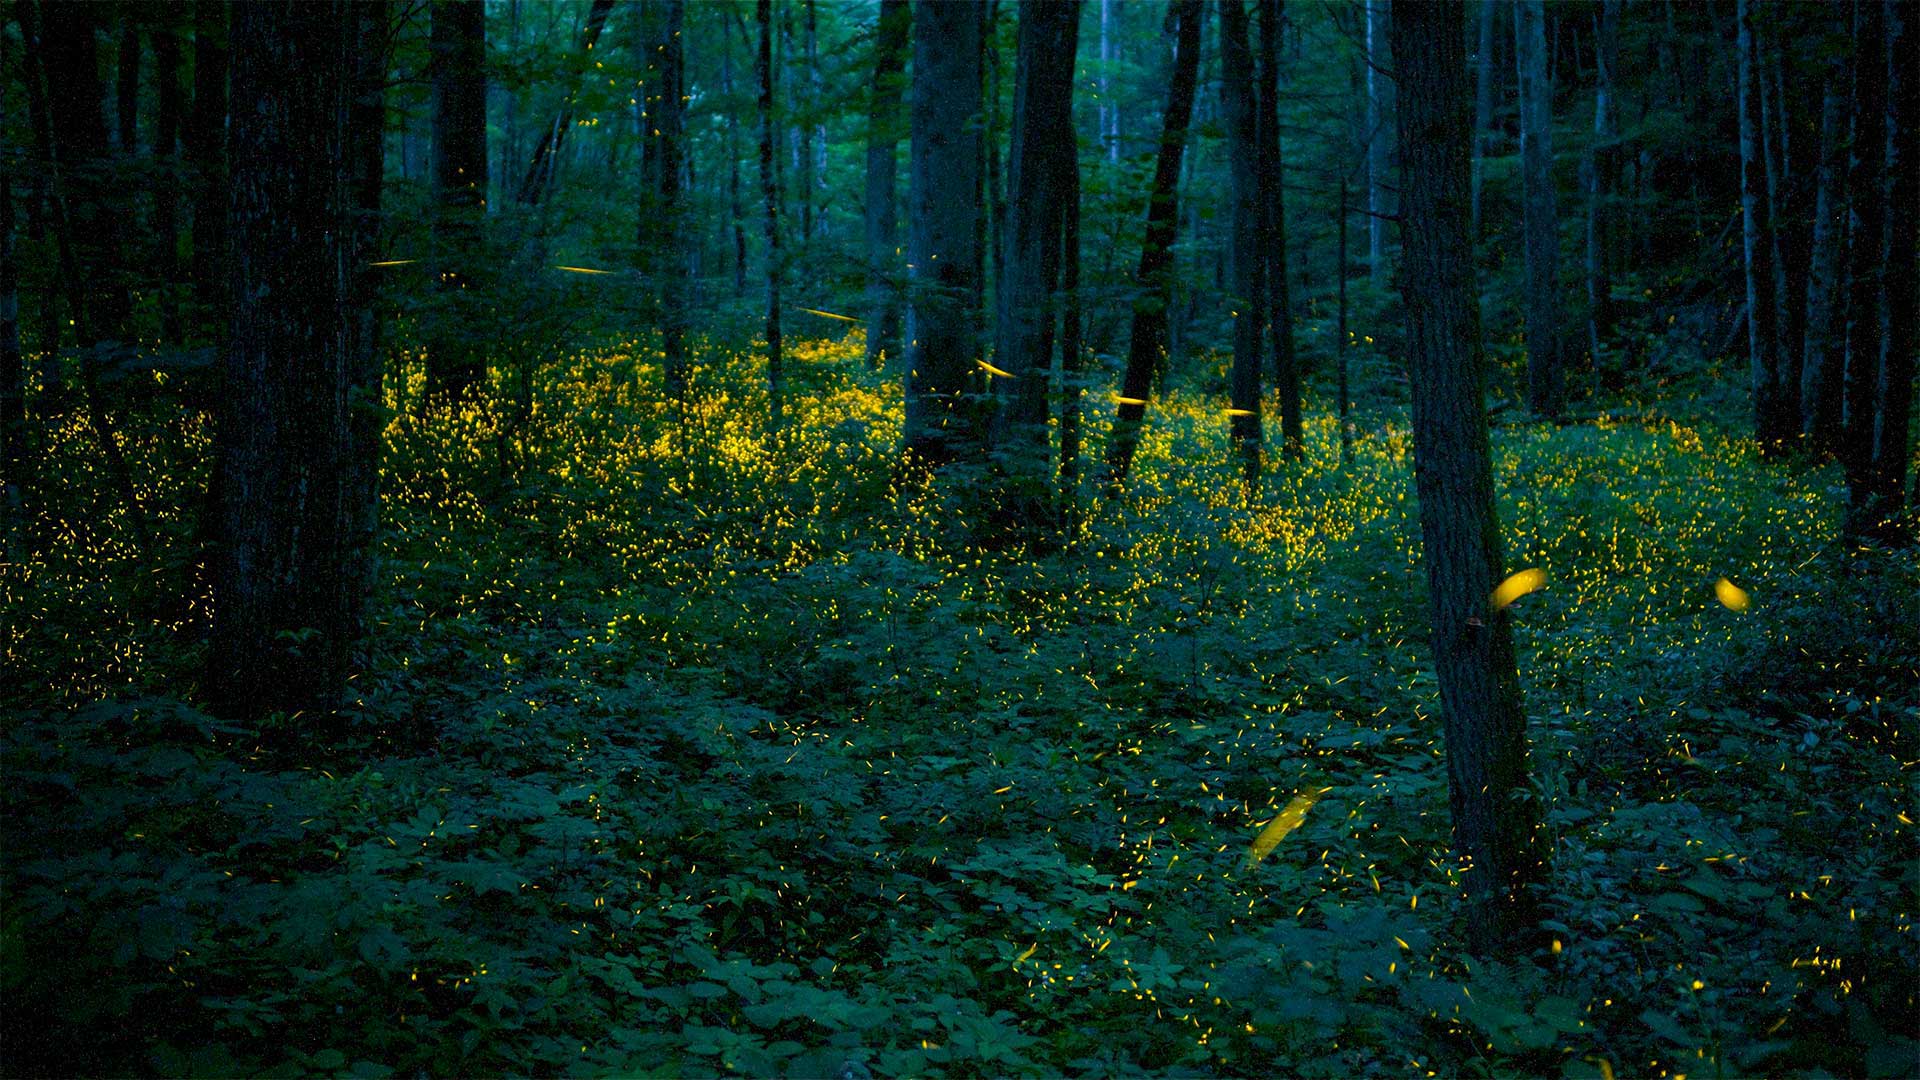 Synchronous fireflies illuminate the forests of Great Smoky Mountains